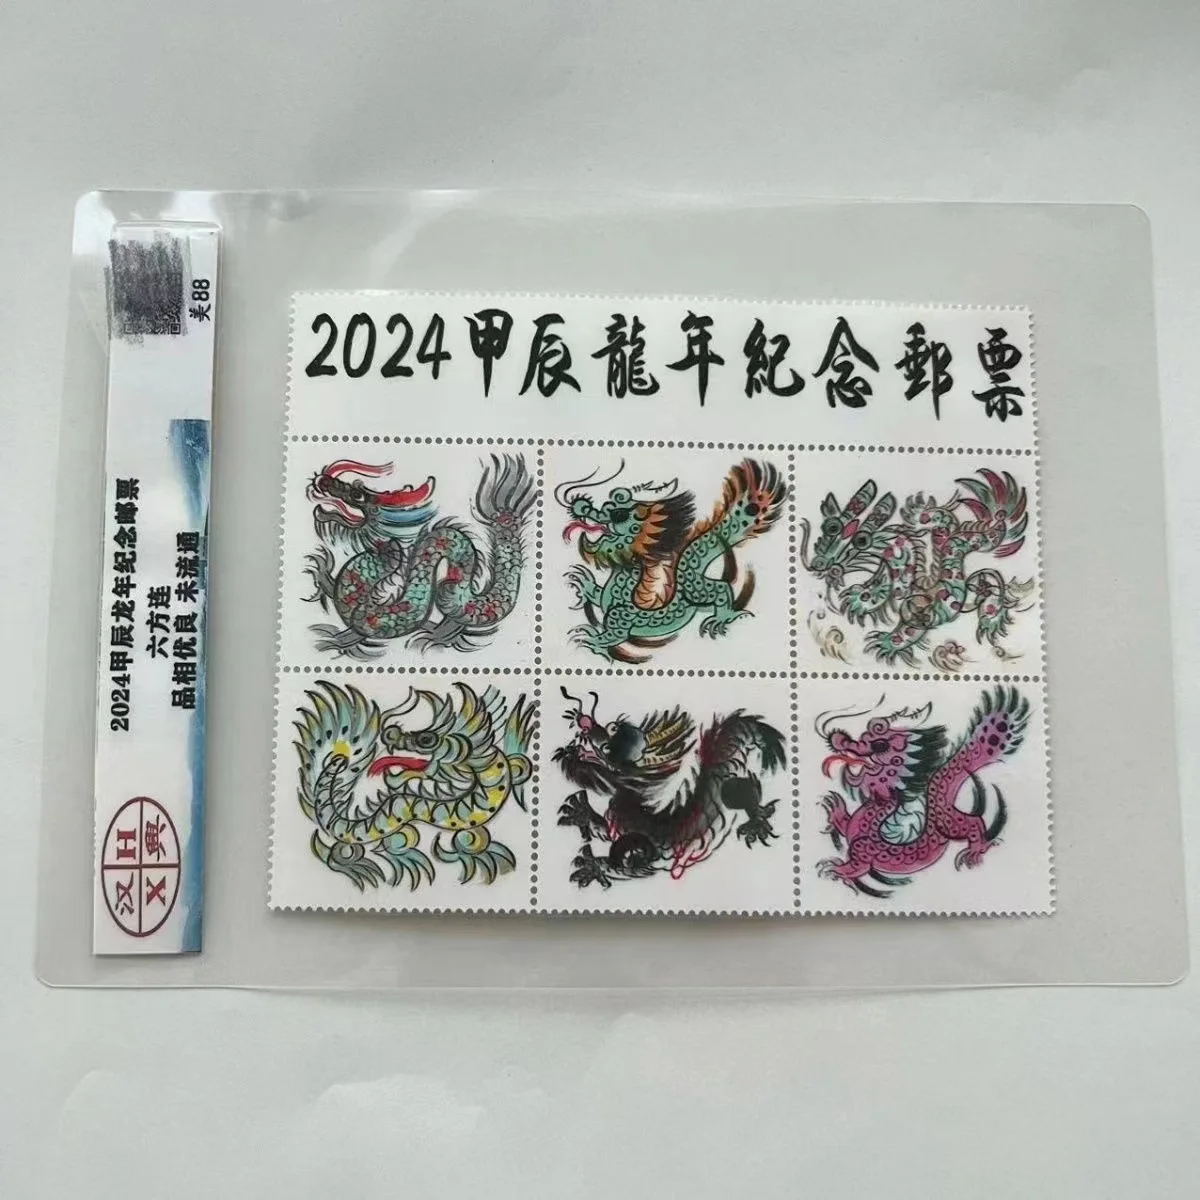 

Year of the Loong Stamp, Classic Antique Postage Stamps for Collection, 6 Jointed Dragon Tickets Set Gifts Rating Level